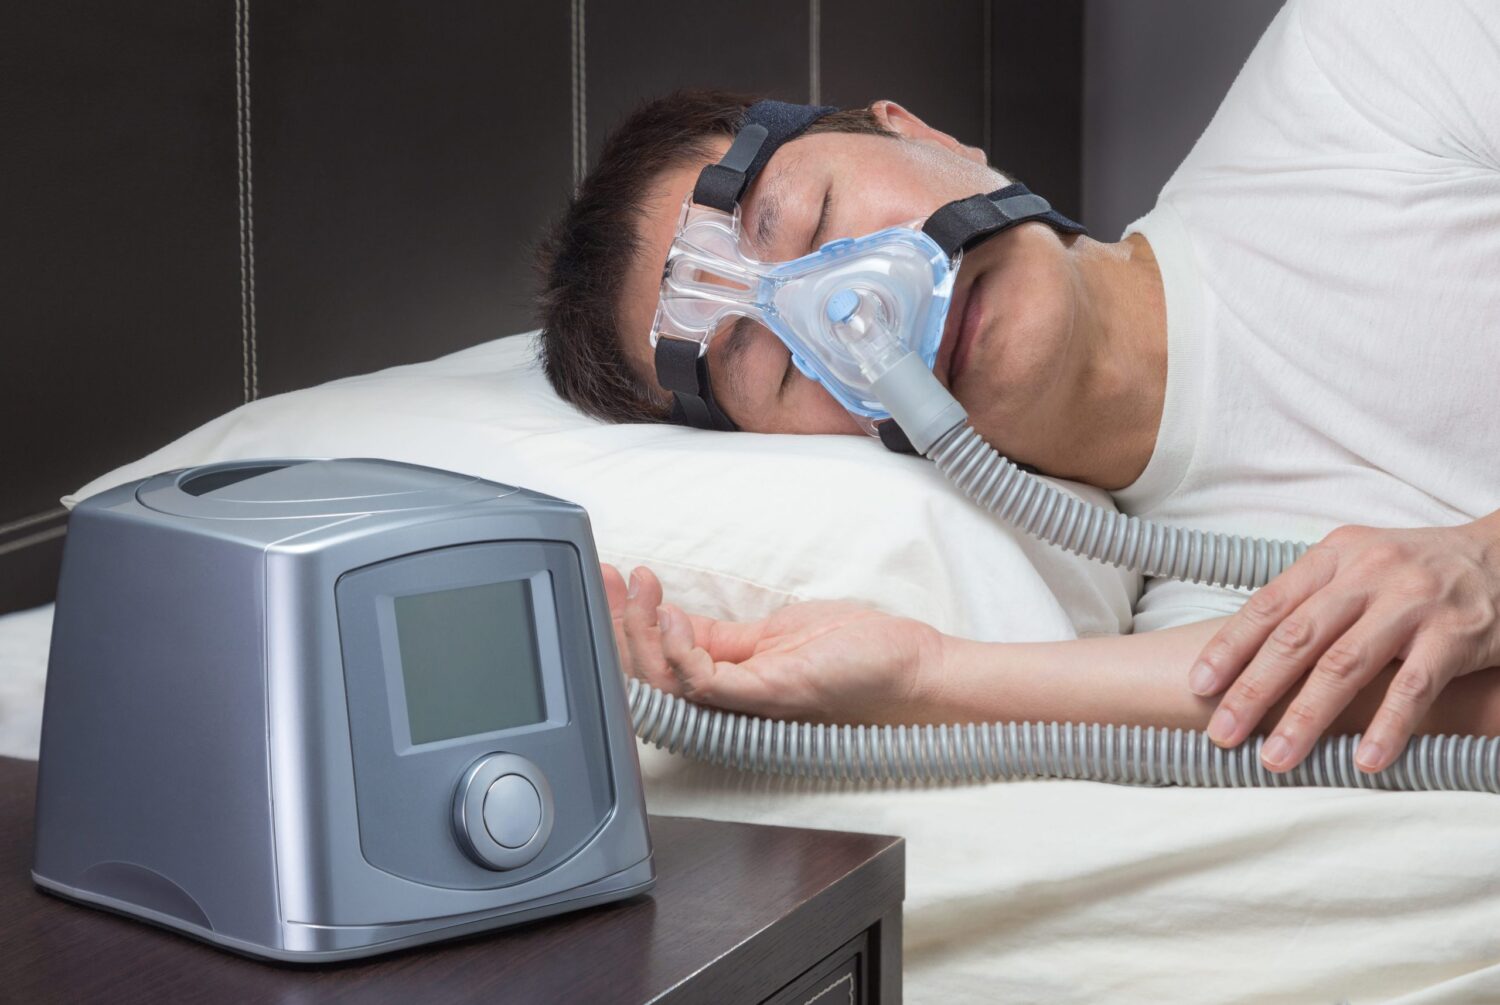 Is your CPAP machine giving you issues?